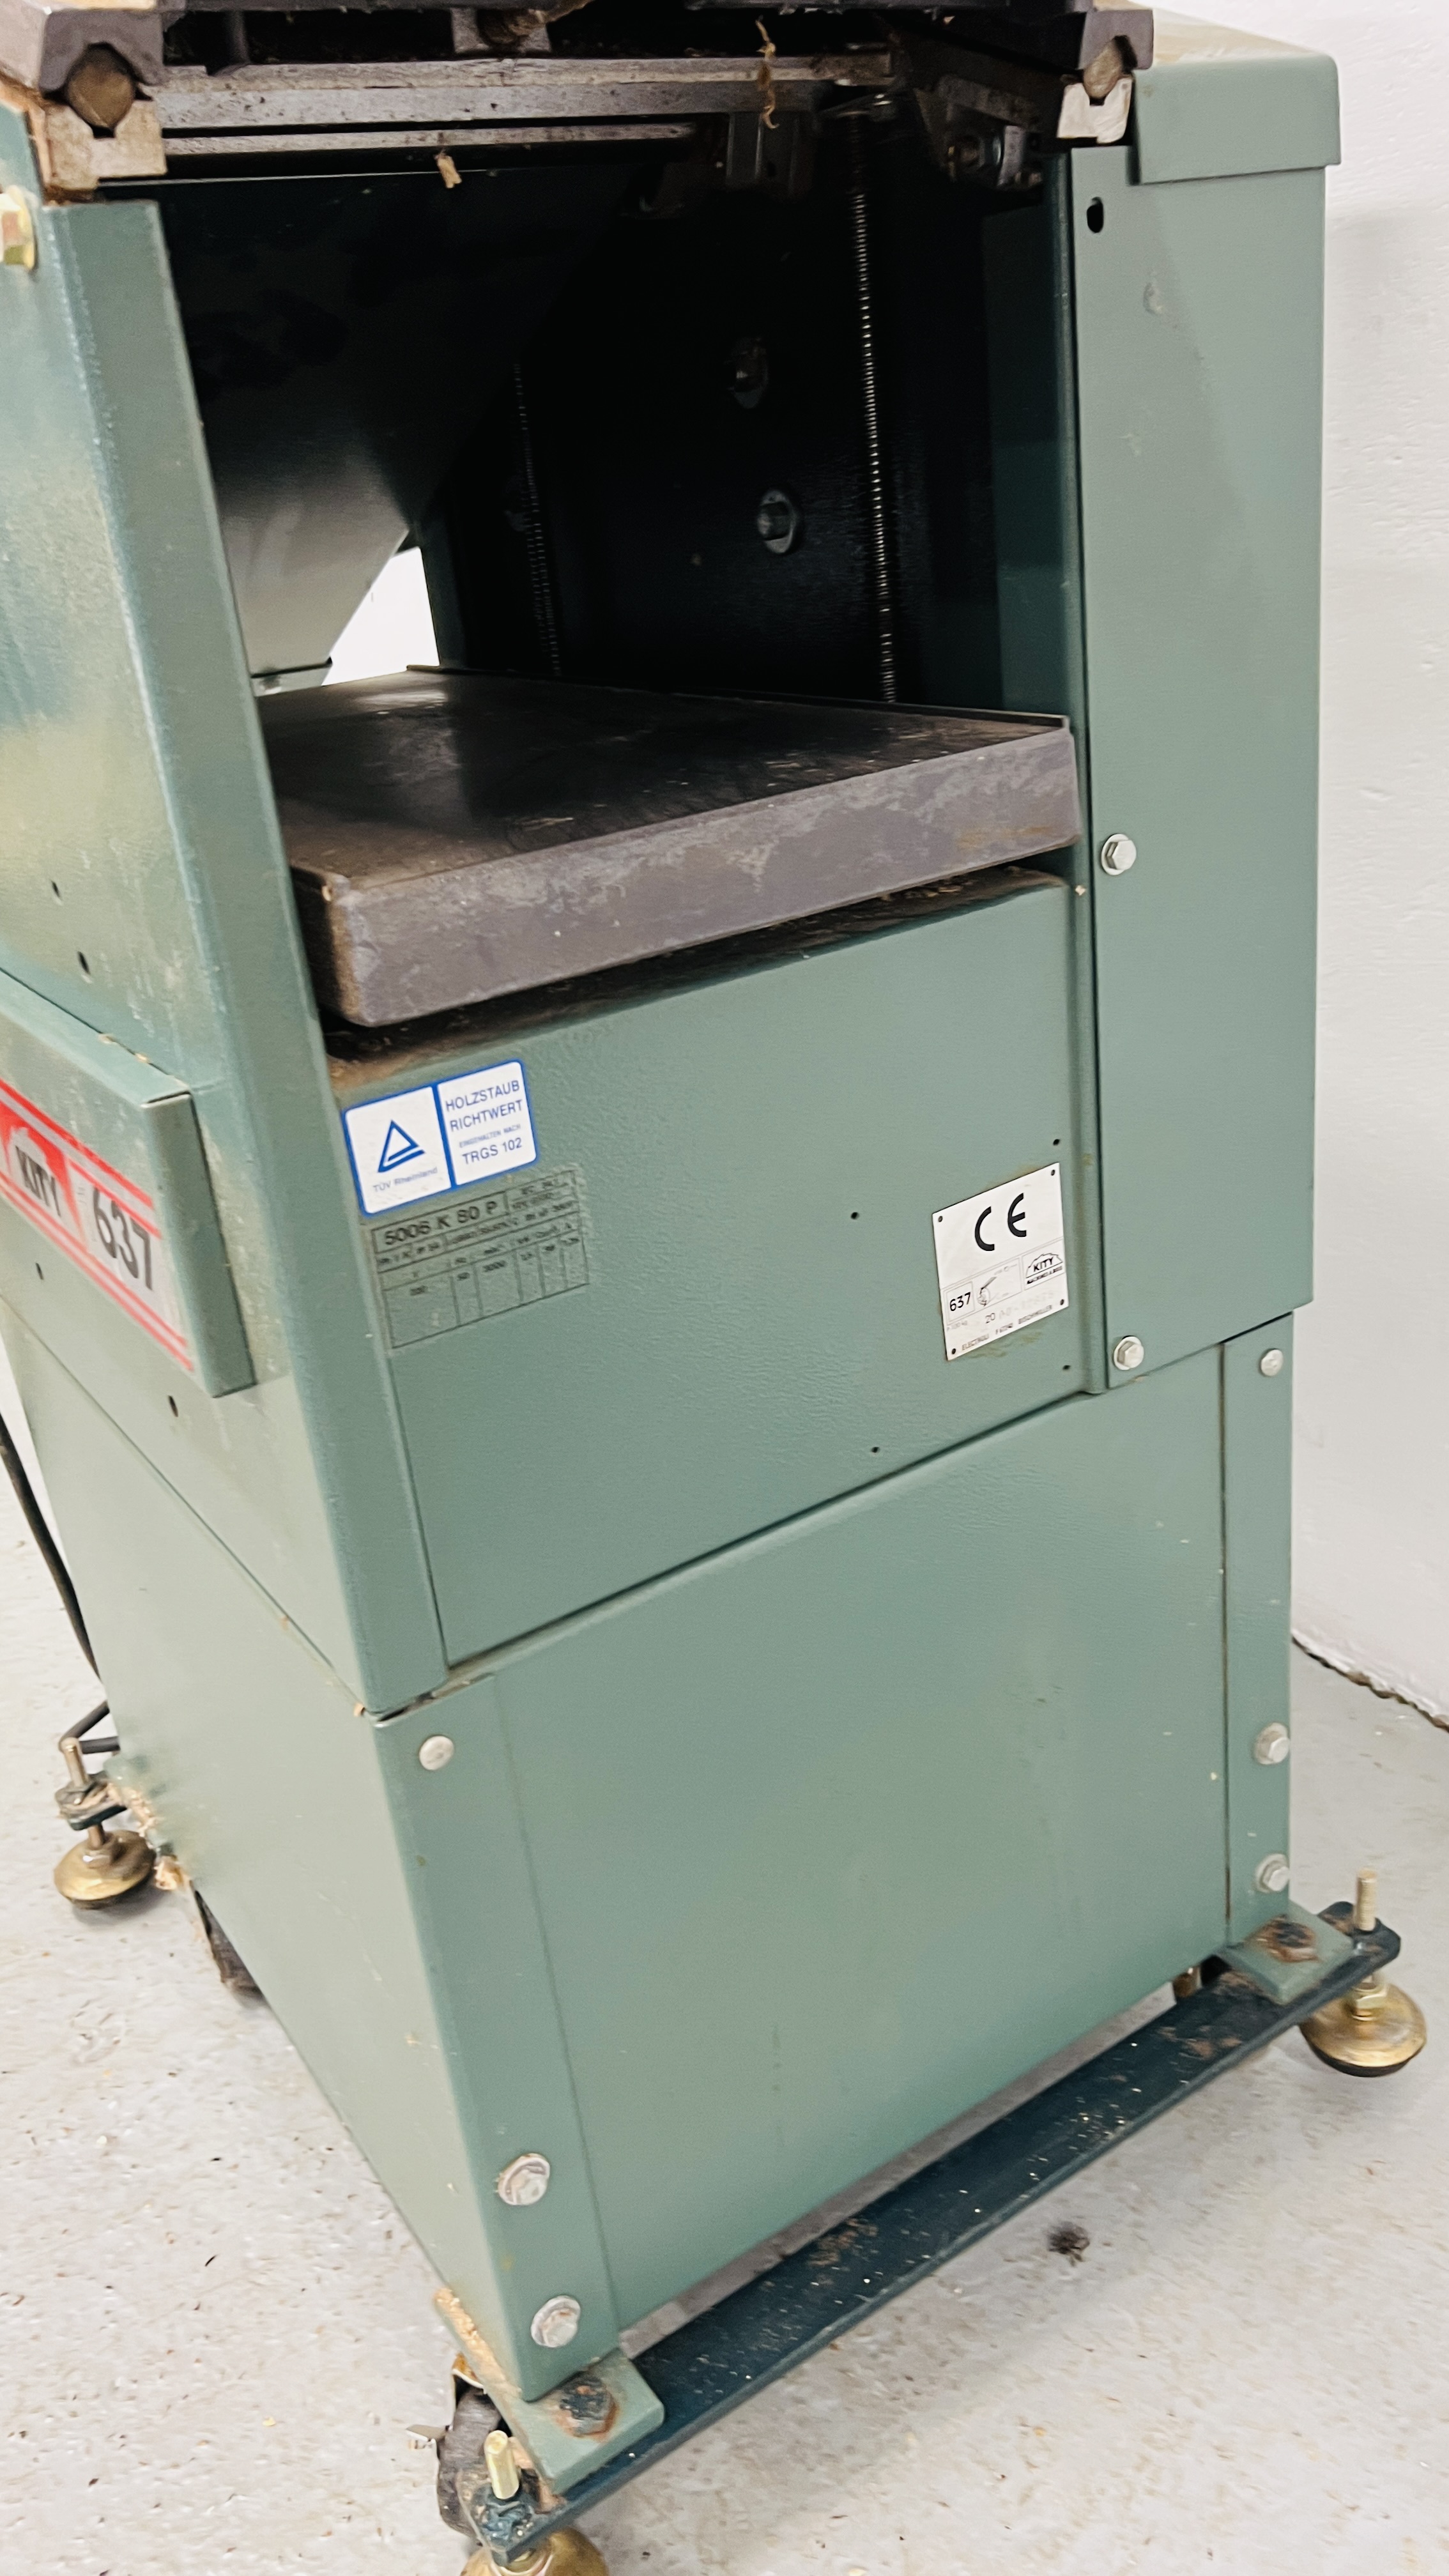 KITY 1637 PLANER THICKNESSER - SOLD AS SEEN. - Image 11 of 12